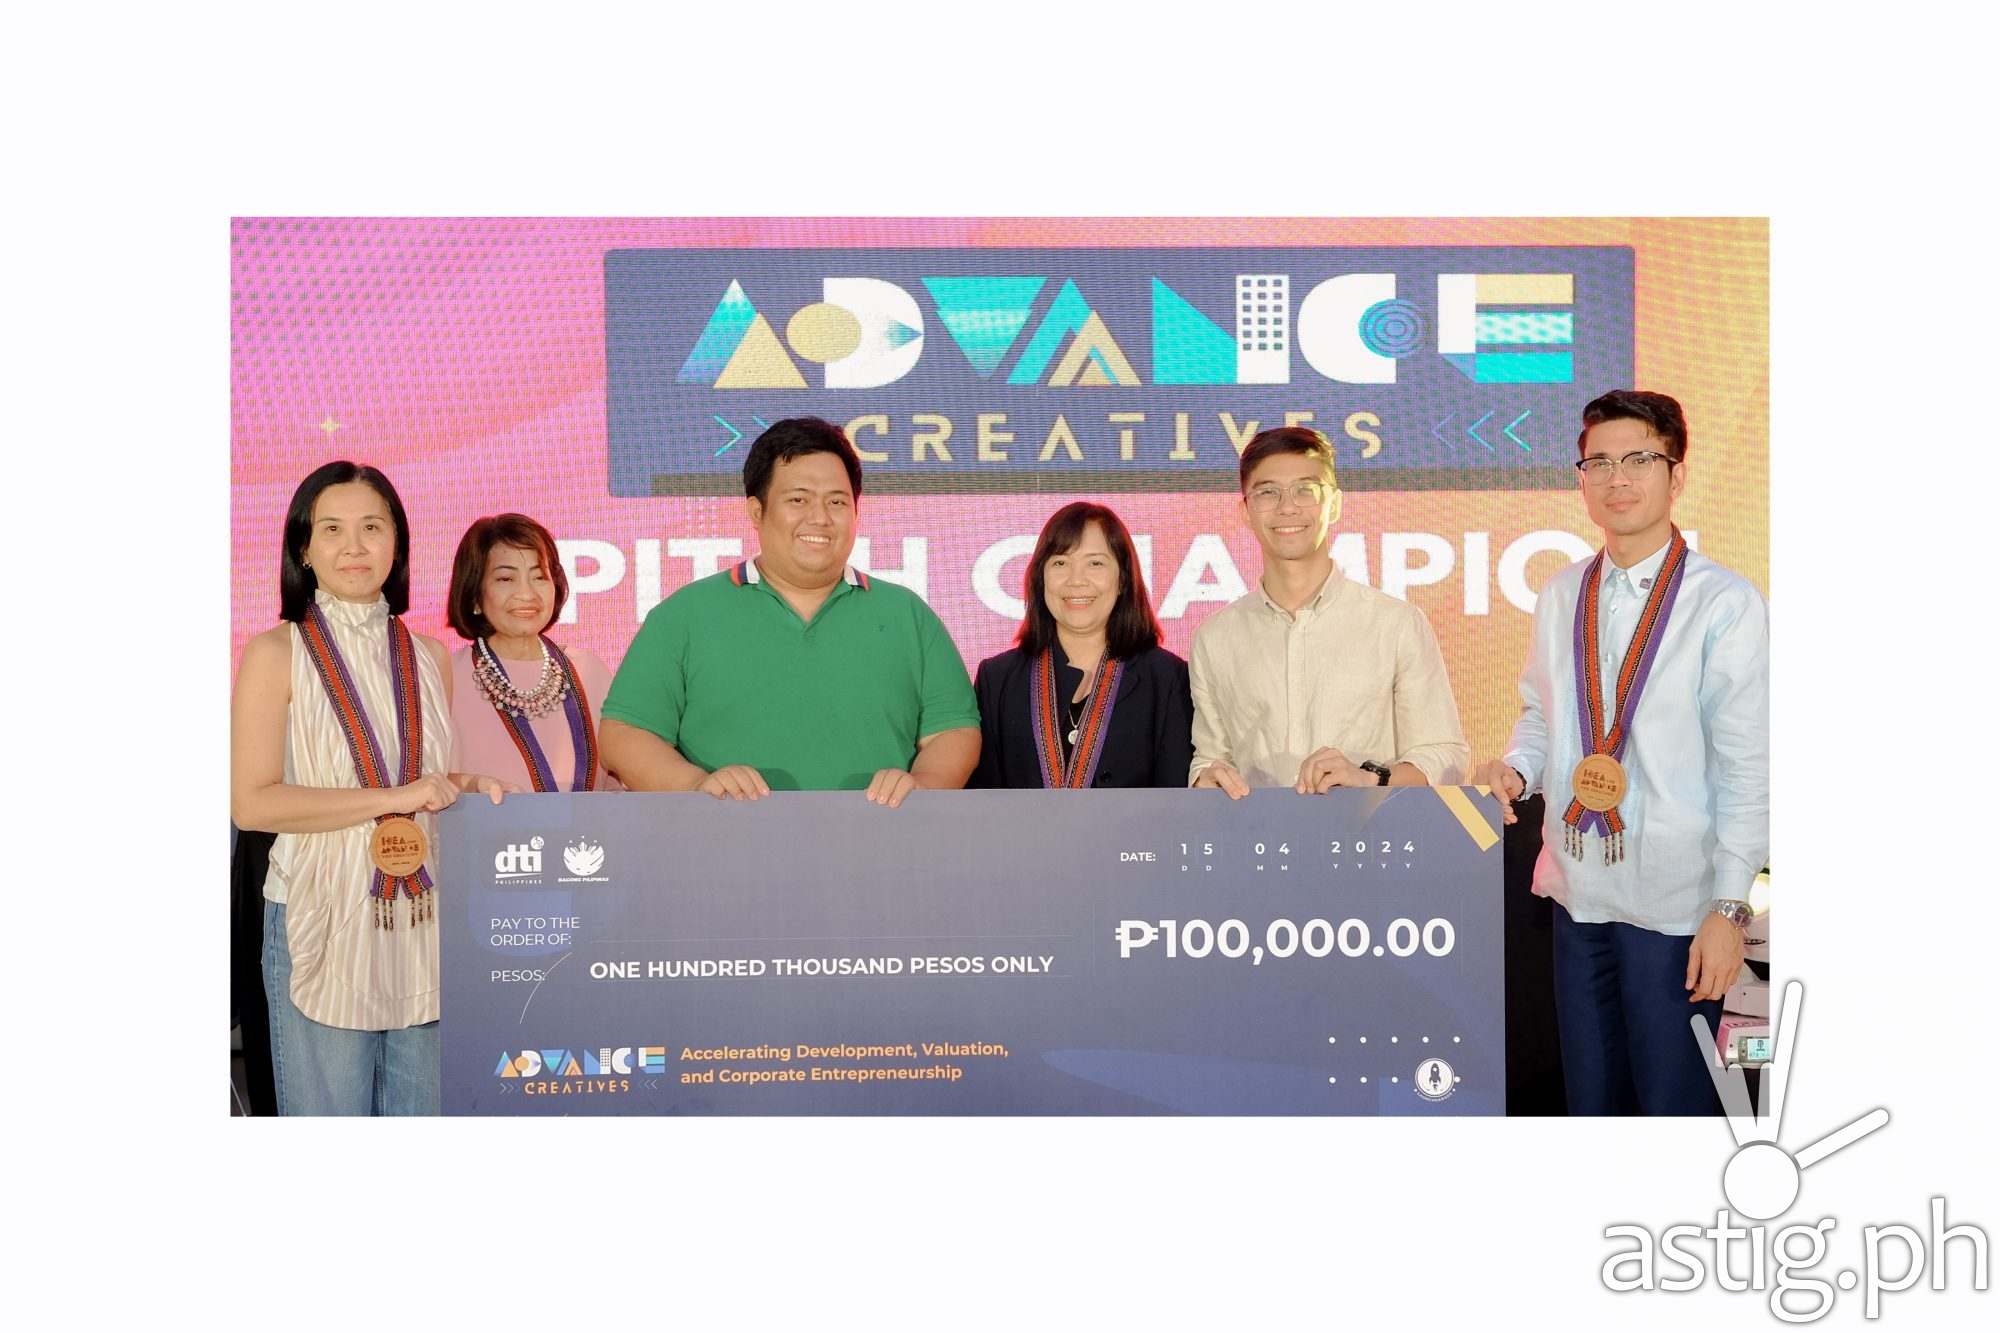 MVRK Simulations, ROC PH named as winners of DTI’s IDEA and ADVanCE for Creatives Programs